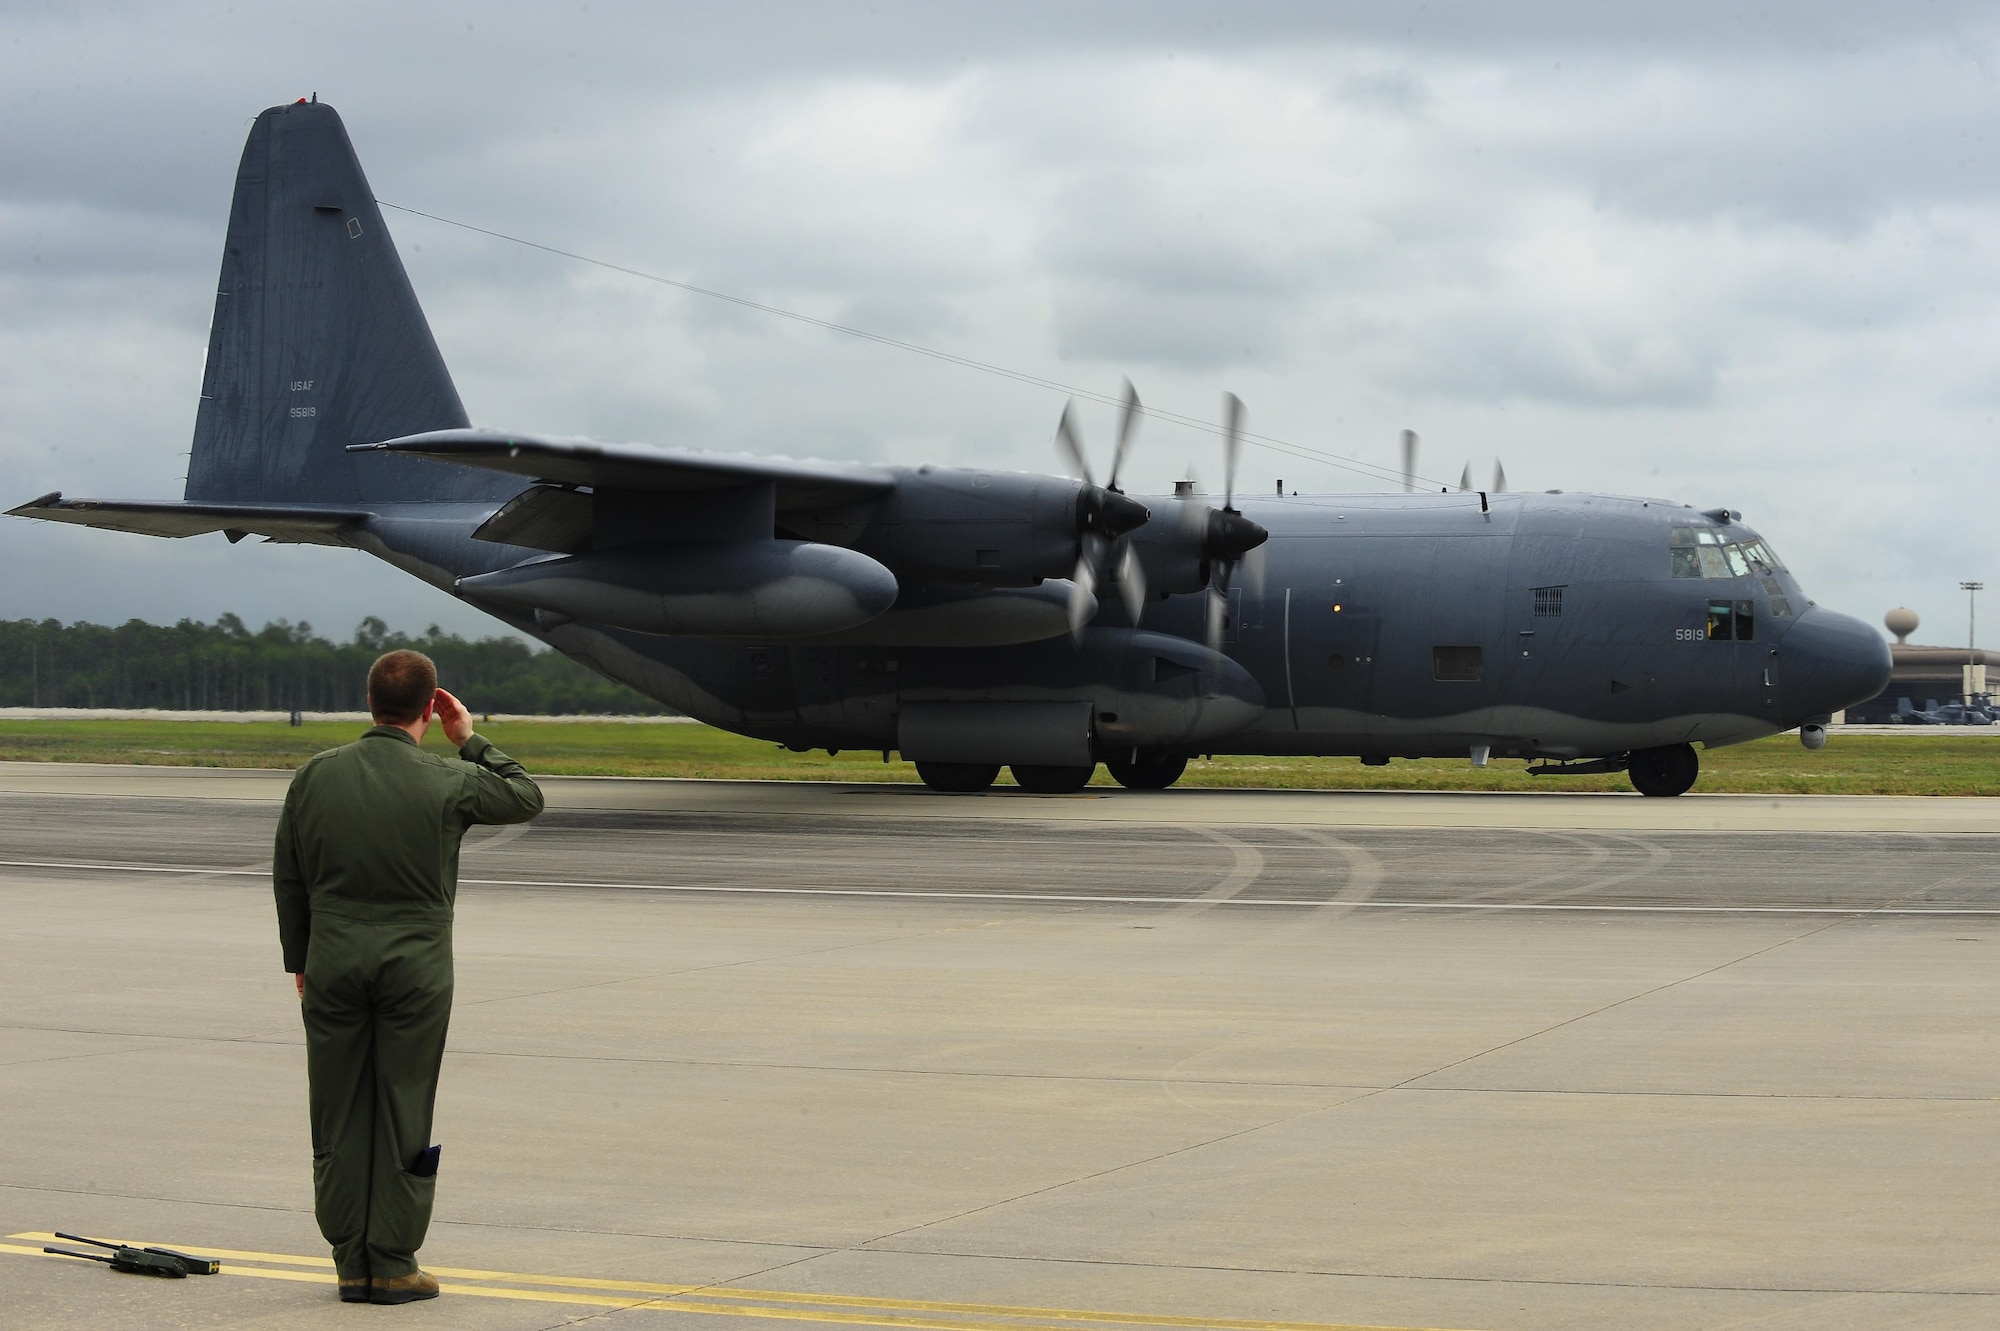 Capt. Tim Nettles, 1st Special Operations Group Detachment 1 pilot, salutes the MC 130 P Combat Shadow at Hurlburt Field Fla., May 15, 2015. Since Desert Storm, the MC-130P has been involved in many operations: Northern and Southern Watch, Deny Flight in Yugoslavia, Restore Democracy and Uphold Democracy in Haiti, Deliberate Force and Joint Endeavor in Bosnia, Assured Response in Liberia, Guardian Retrieval from Zaire, Enduring Freedom in Afghanistan, Iraqi Freedom, New Dawn and Odyssey Dawn. (U.S. Air Force photo/Airman 1st Class Andrea Posey)